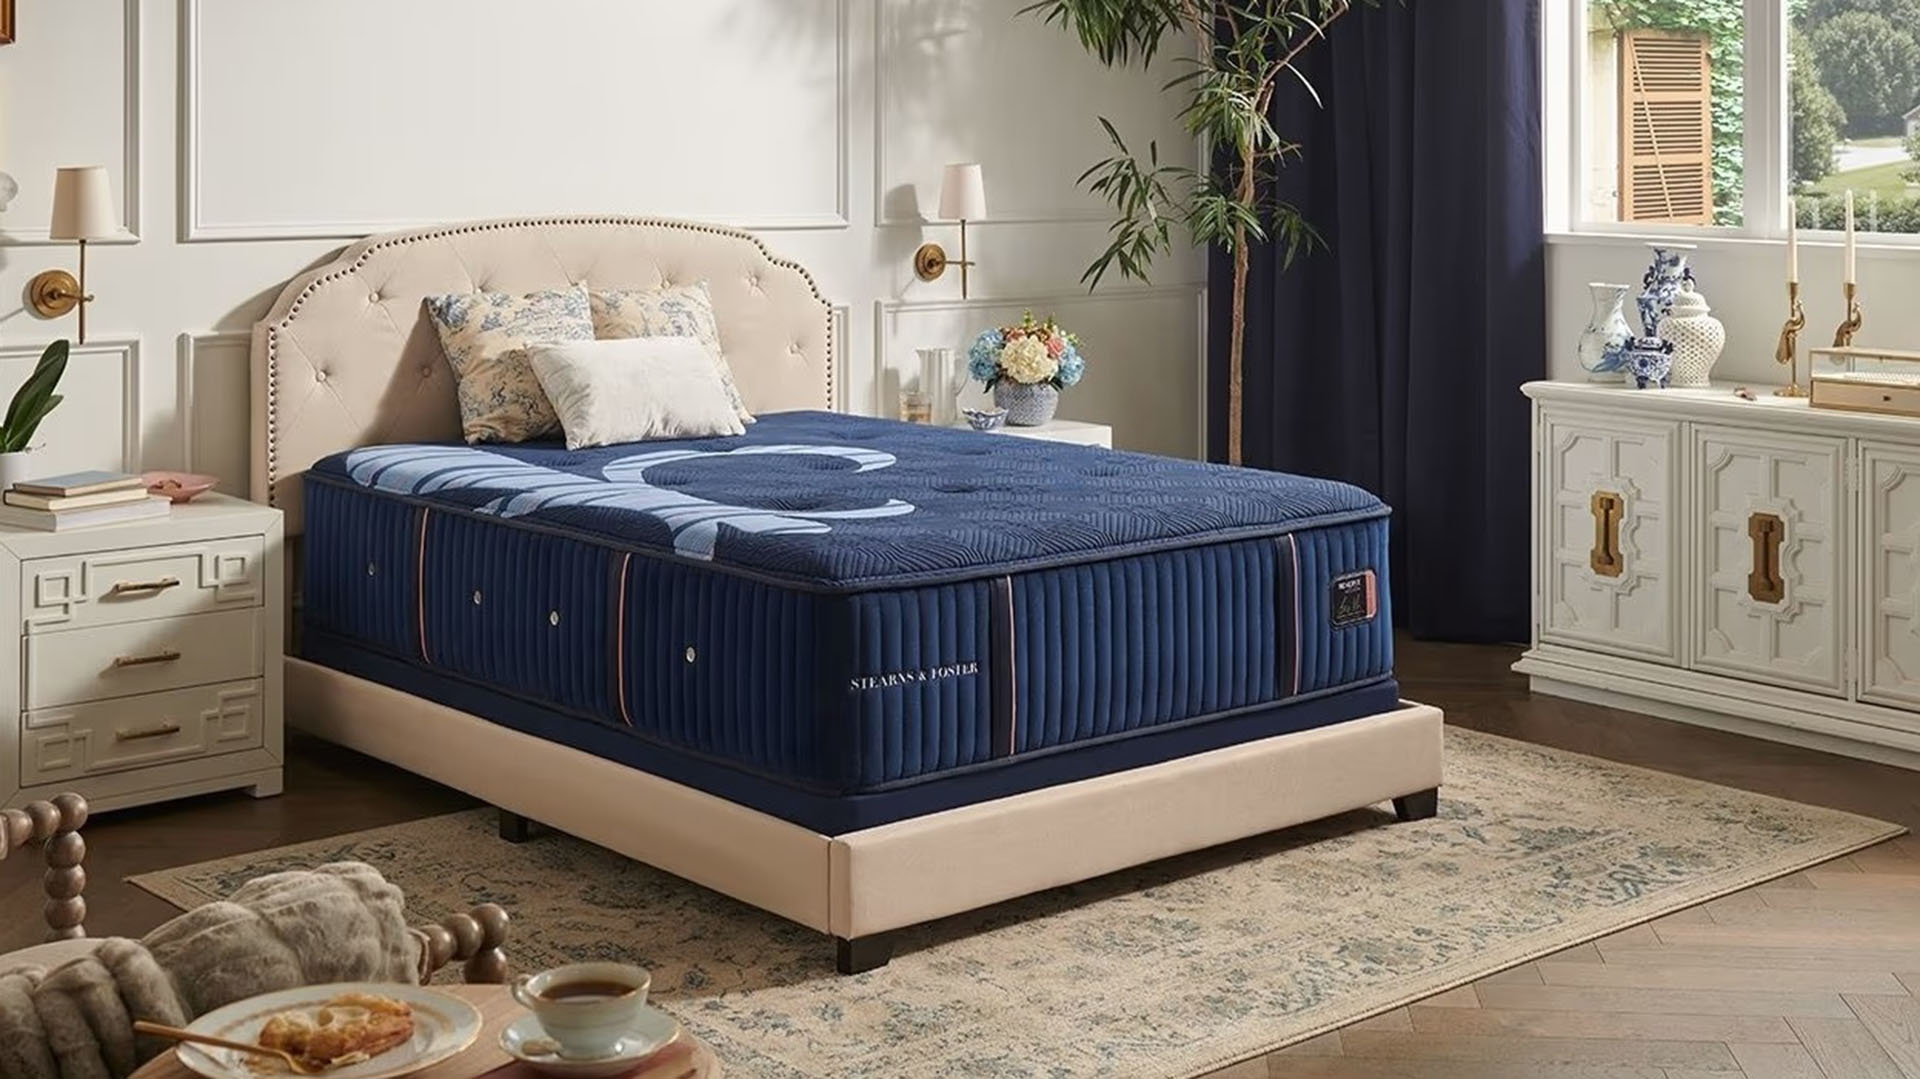 Stearns & Foster mattresses in Macon are designed with comfort and support in mind.